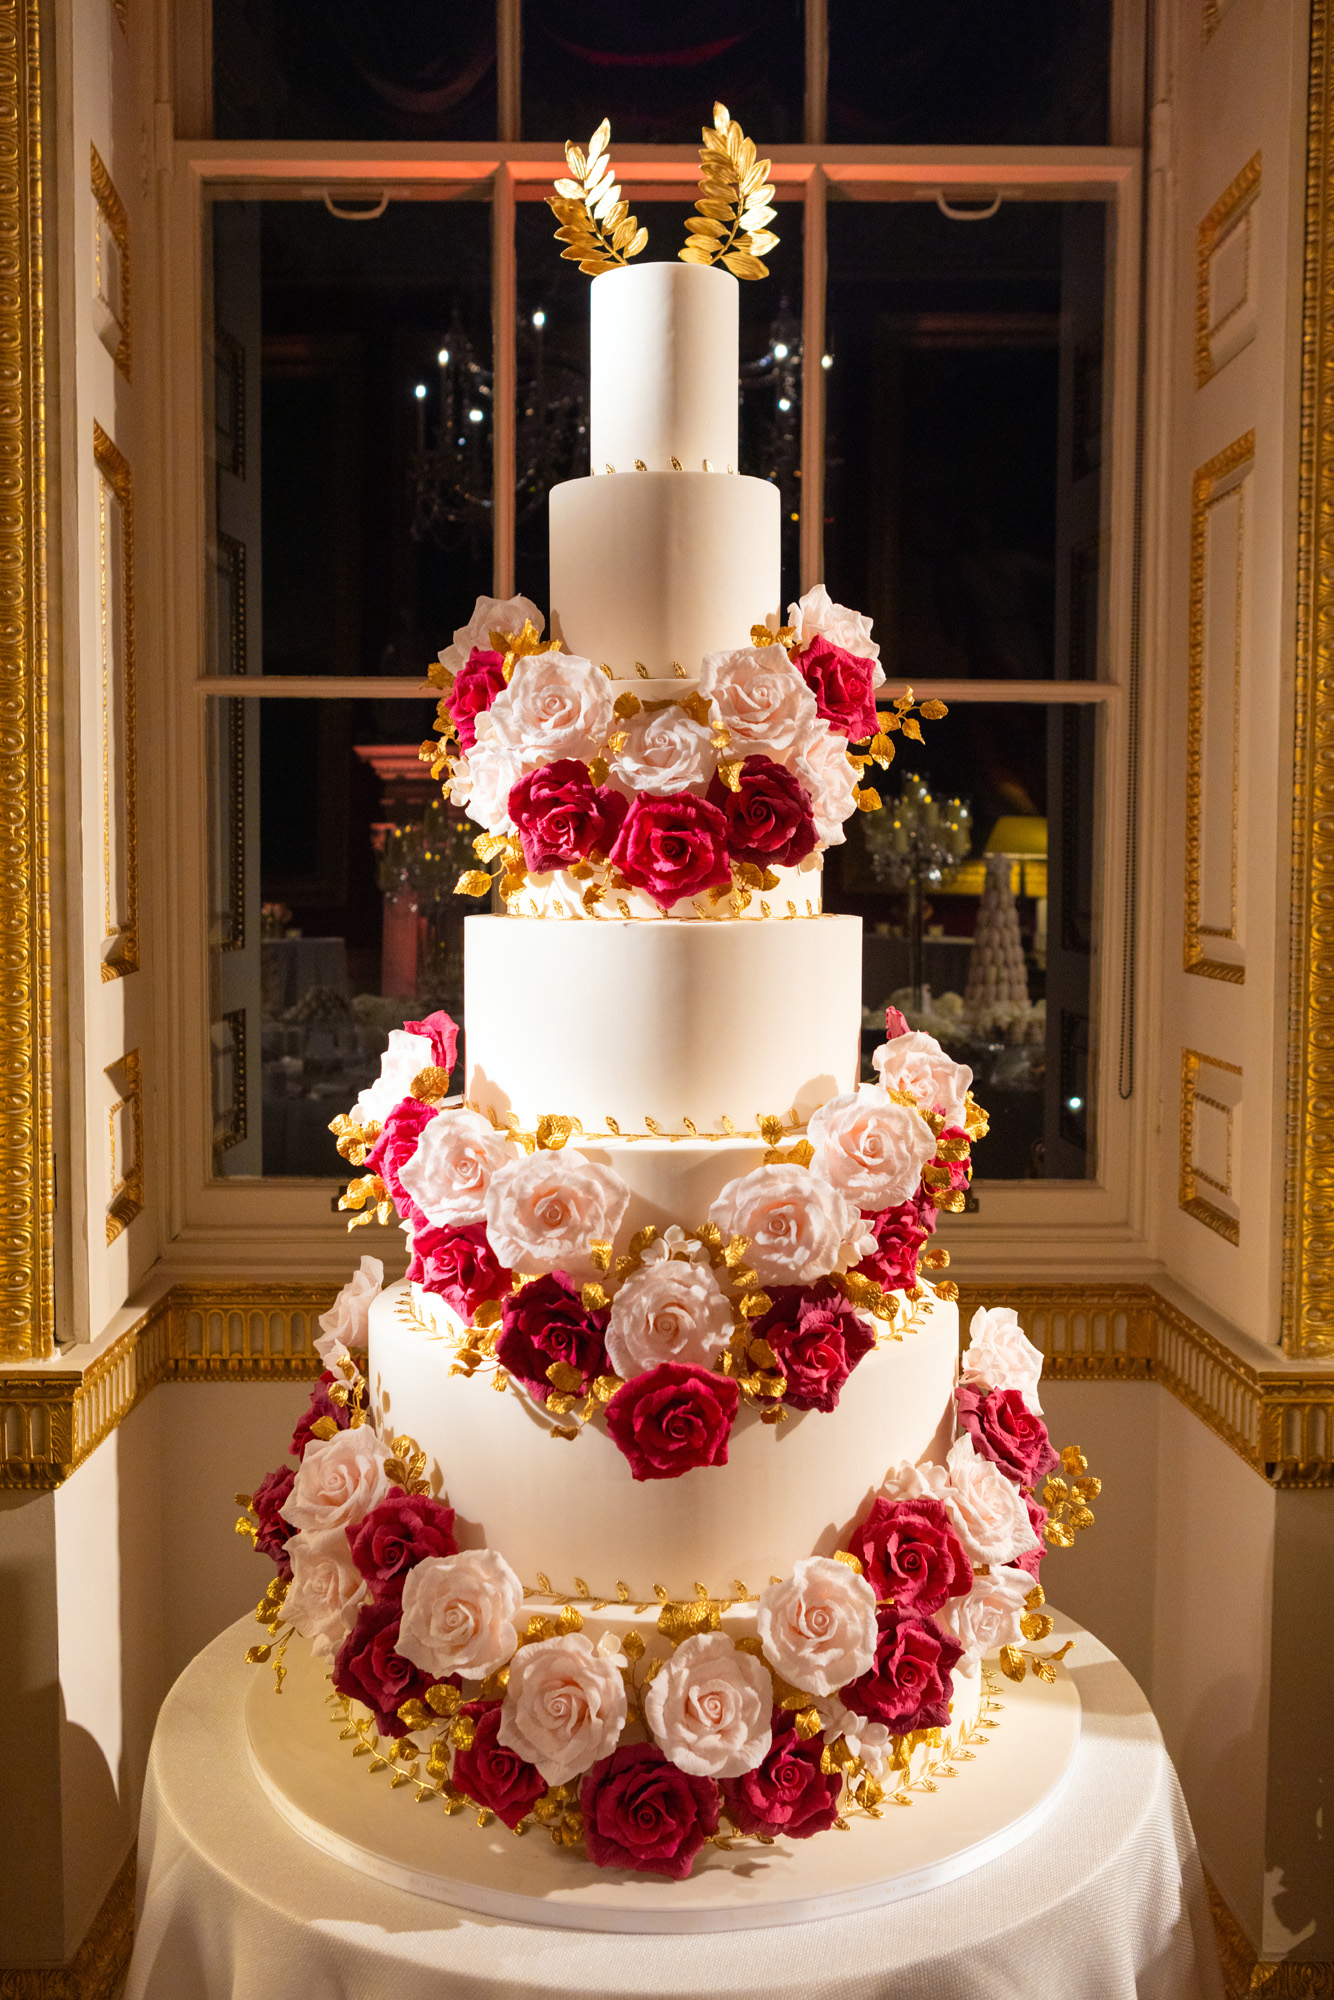 Luxury wedding cake, Rene, By Yevnig in the Great Room at Spencer House